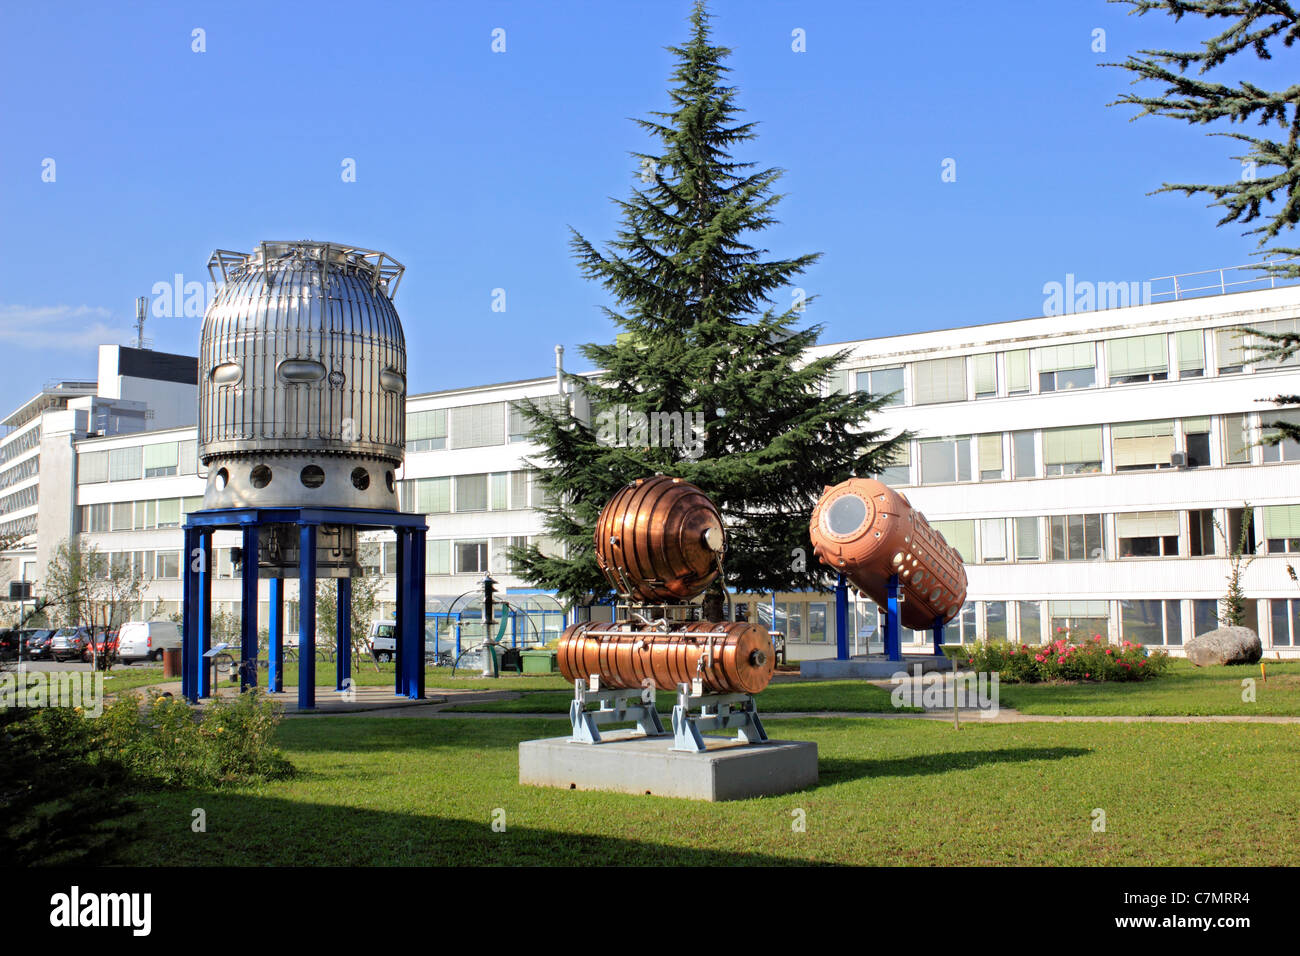 CERN - European Organization for Nuclear Research. Founded in 1954 on the Franco–Swiss border near Geneva Switzerland Europe. Stock Photo